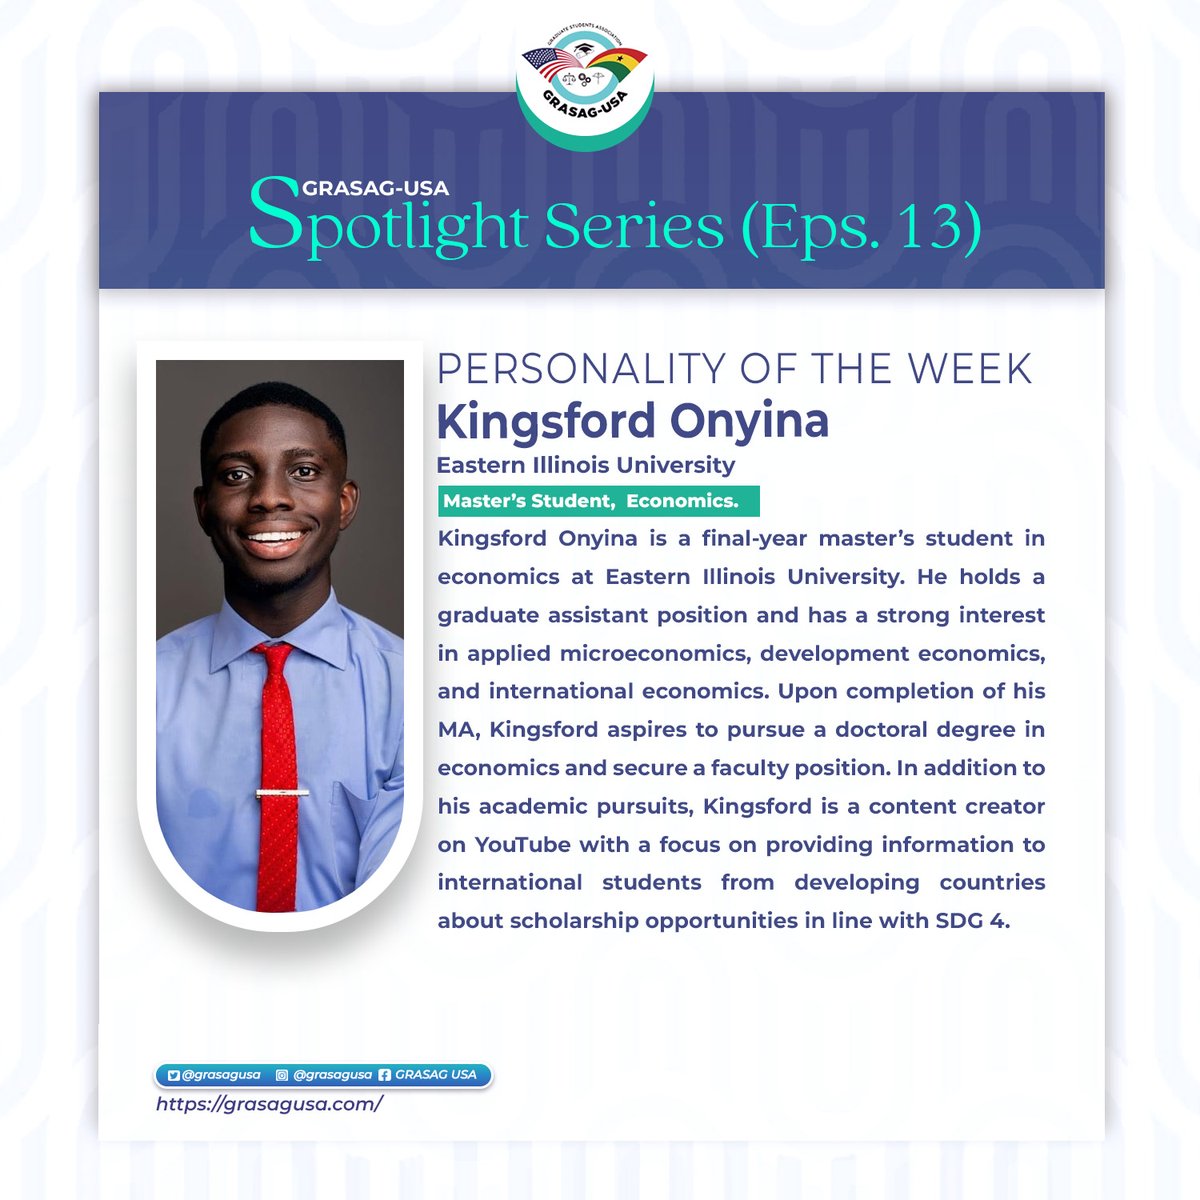 Our spotlight of this week is Kingsford Onyina. Today, GRASAG-USA recognizes and celebrates you. We are confident that all your hopes and dreams will be realised. Best wishes for your future endeavors, @KingsfordO_  ! #economics #graduate  #Spotlight  #graduatestudent #future